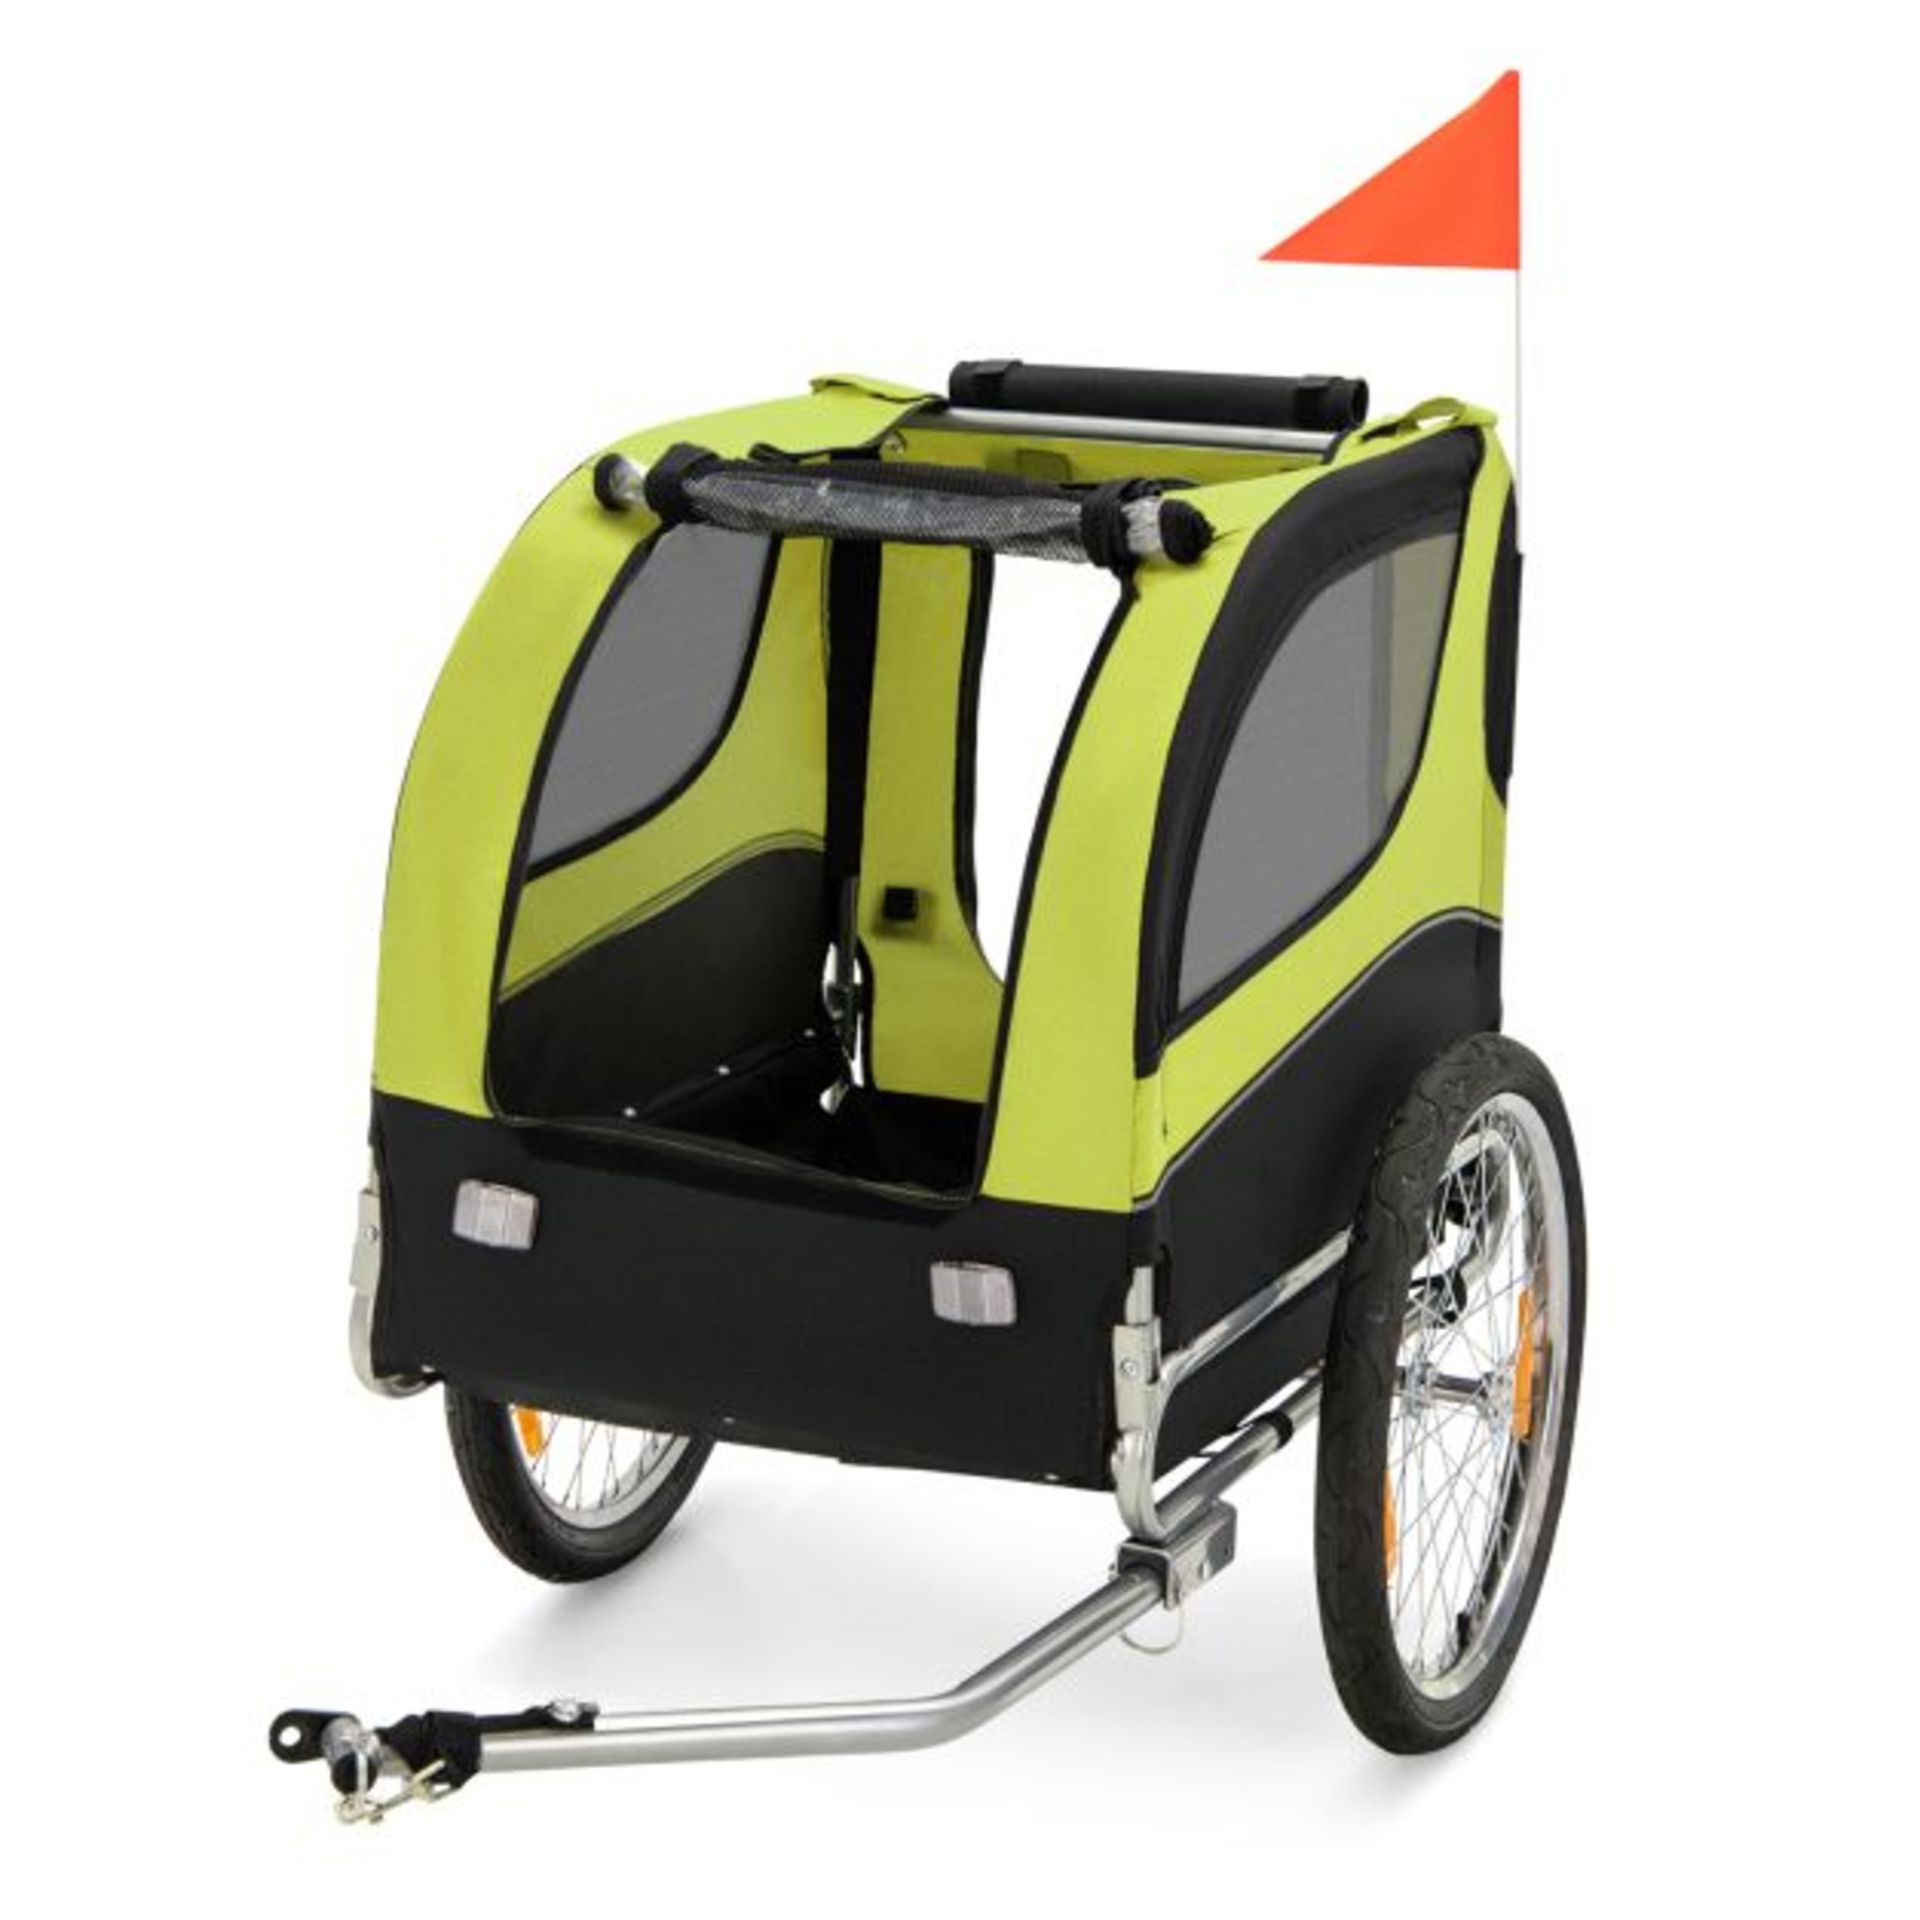 Folding Pet Bike Trailer with 3 Zippered Doors and 8 Reflectors. LOCATION 13A.7